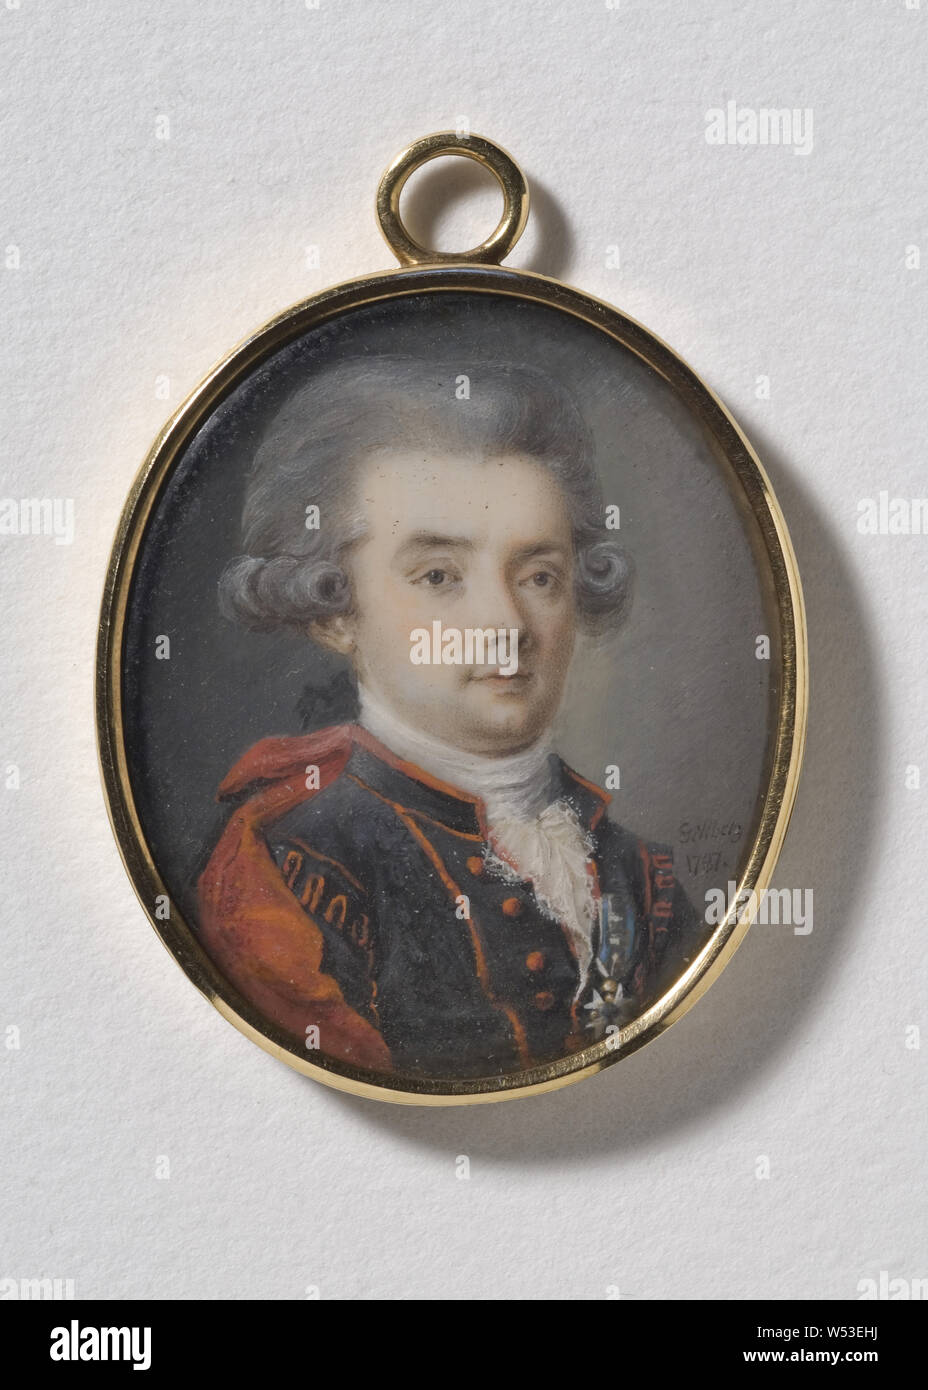 Jacob Axel Gillberg, Unknown courtman, knight of the Sword Order, painting, 1786, Watercolor on ivory, frame in gilded silver with pendant, Height, 3.4 cm (1.3 inch), Width, 2.8 cm (1.1 inch), Signed, Gillberg 1786 Stock Photo